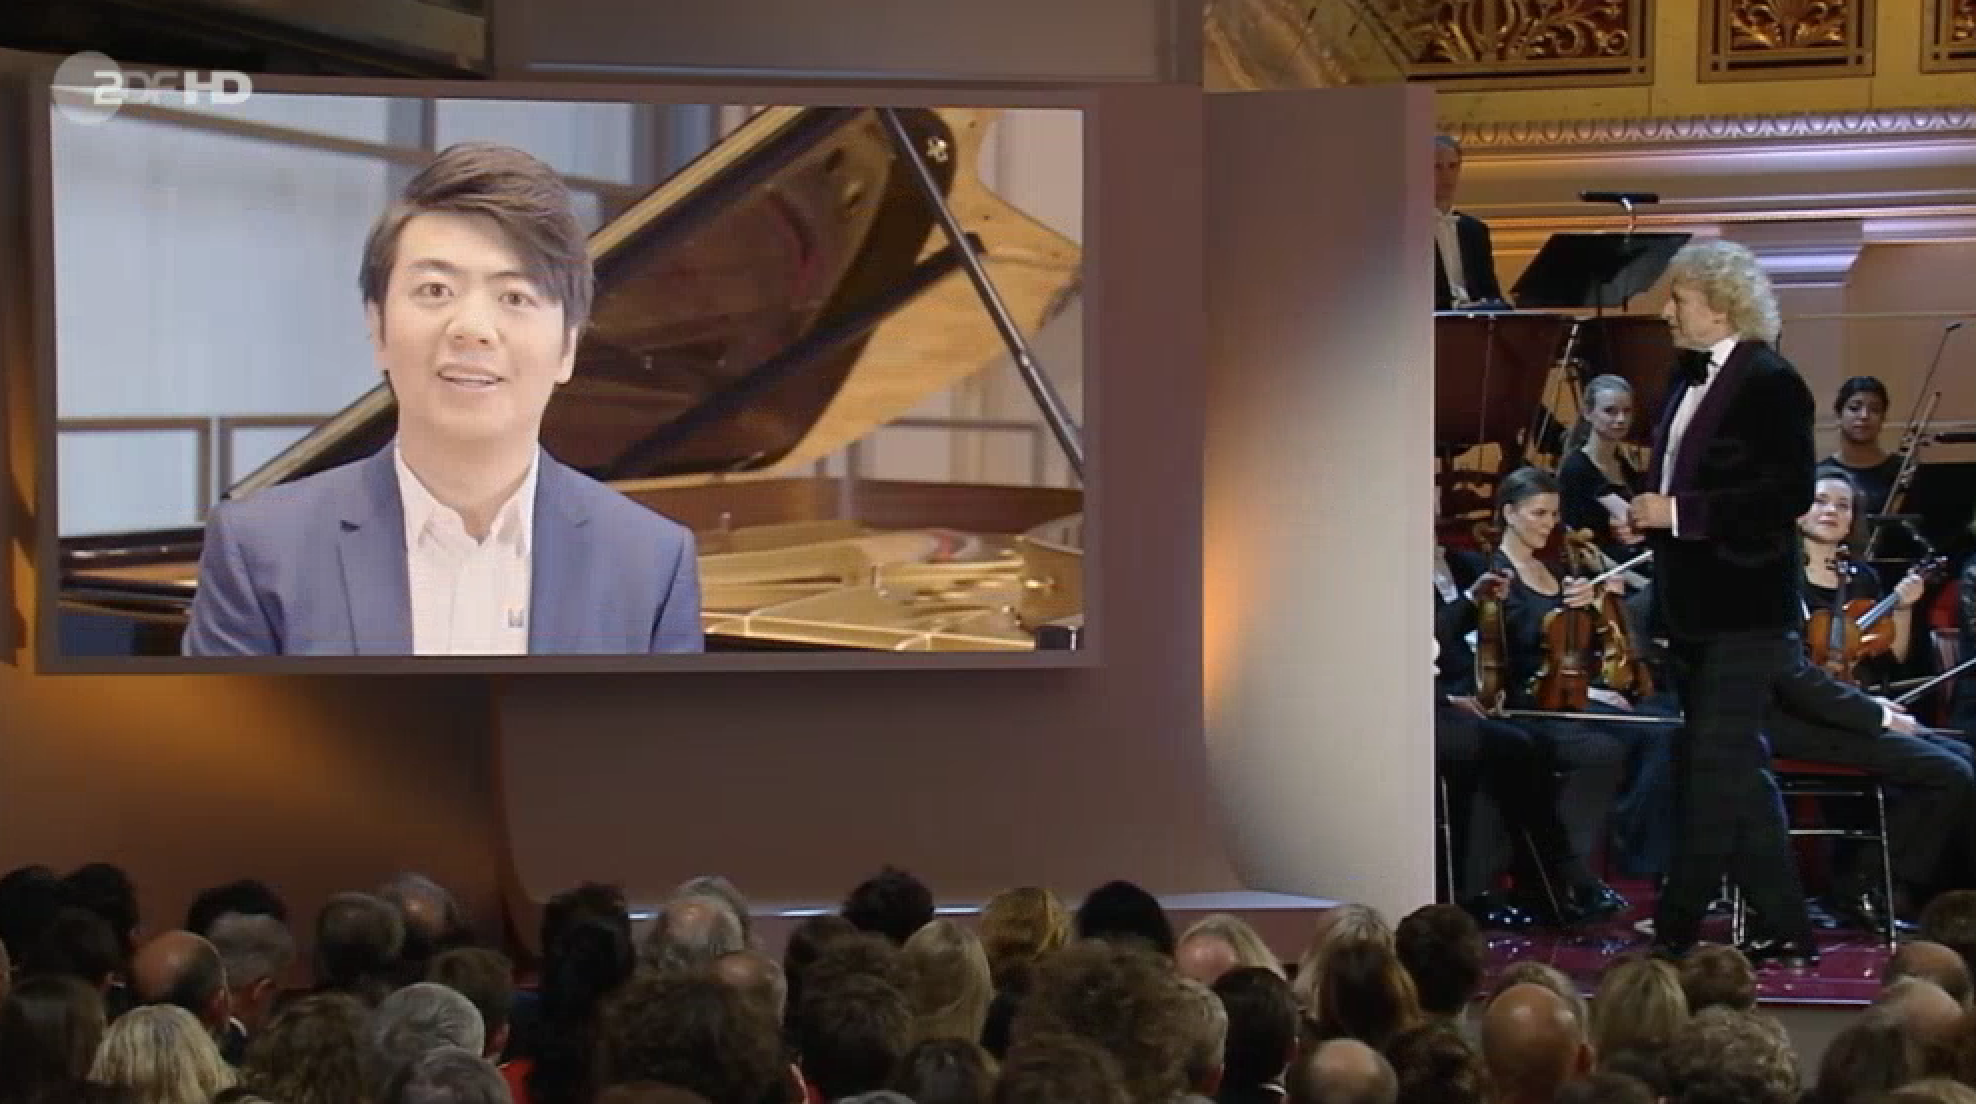 Lang Lang joined the Opus Klassik award ceremony via video, which took place in Berlin on October 13, 2019.